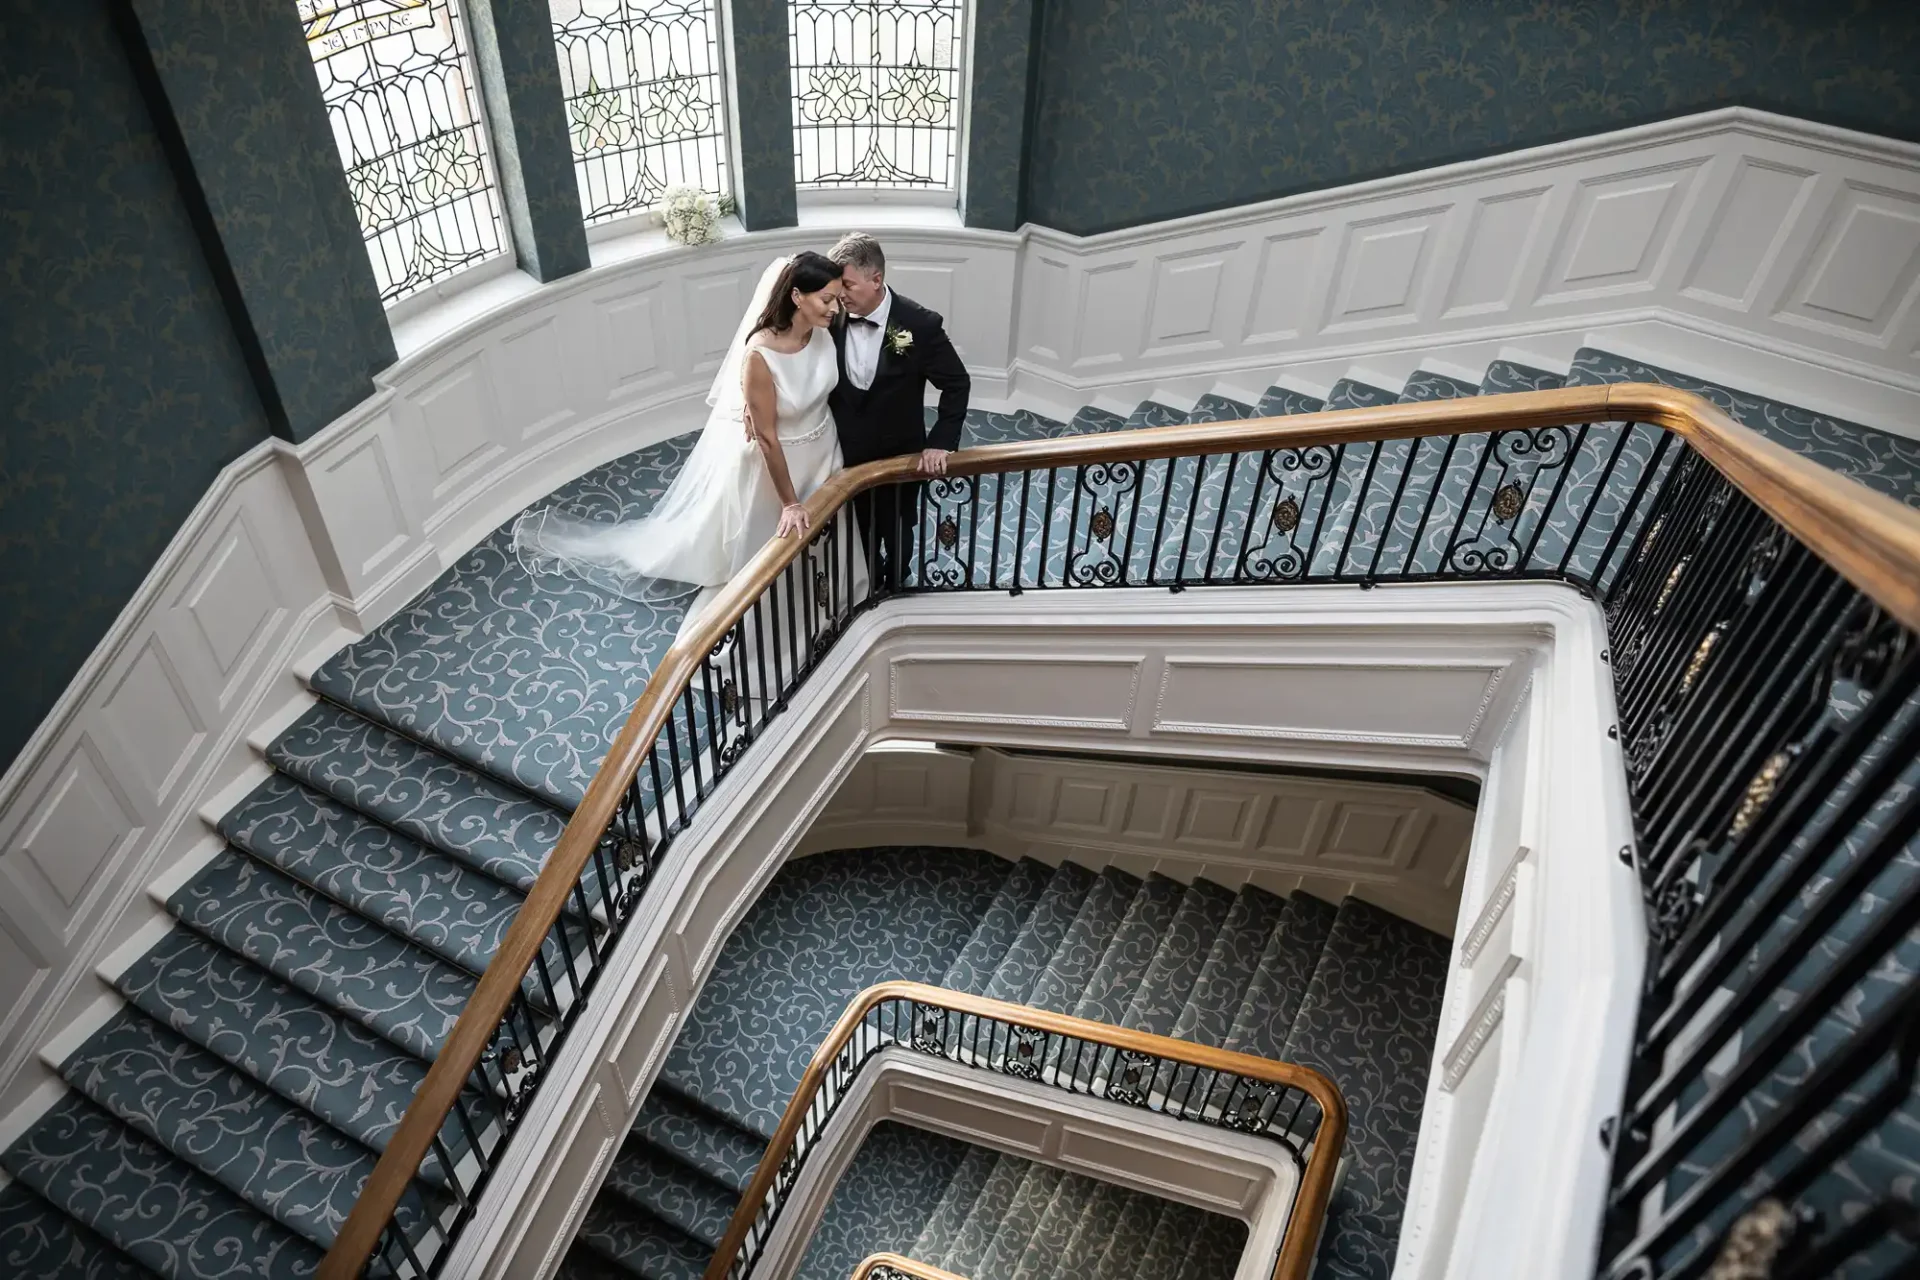 A bride and groom sharing an intimate moment on a grand staircase with ornate railings and elegant wallpaper, viewed from above.